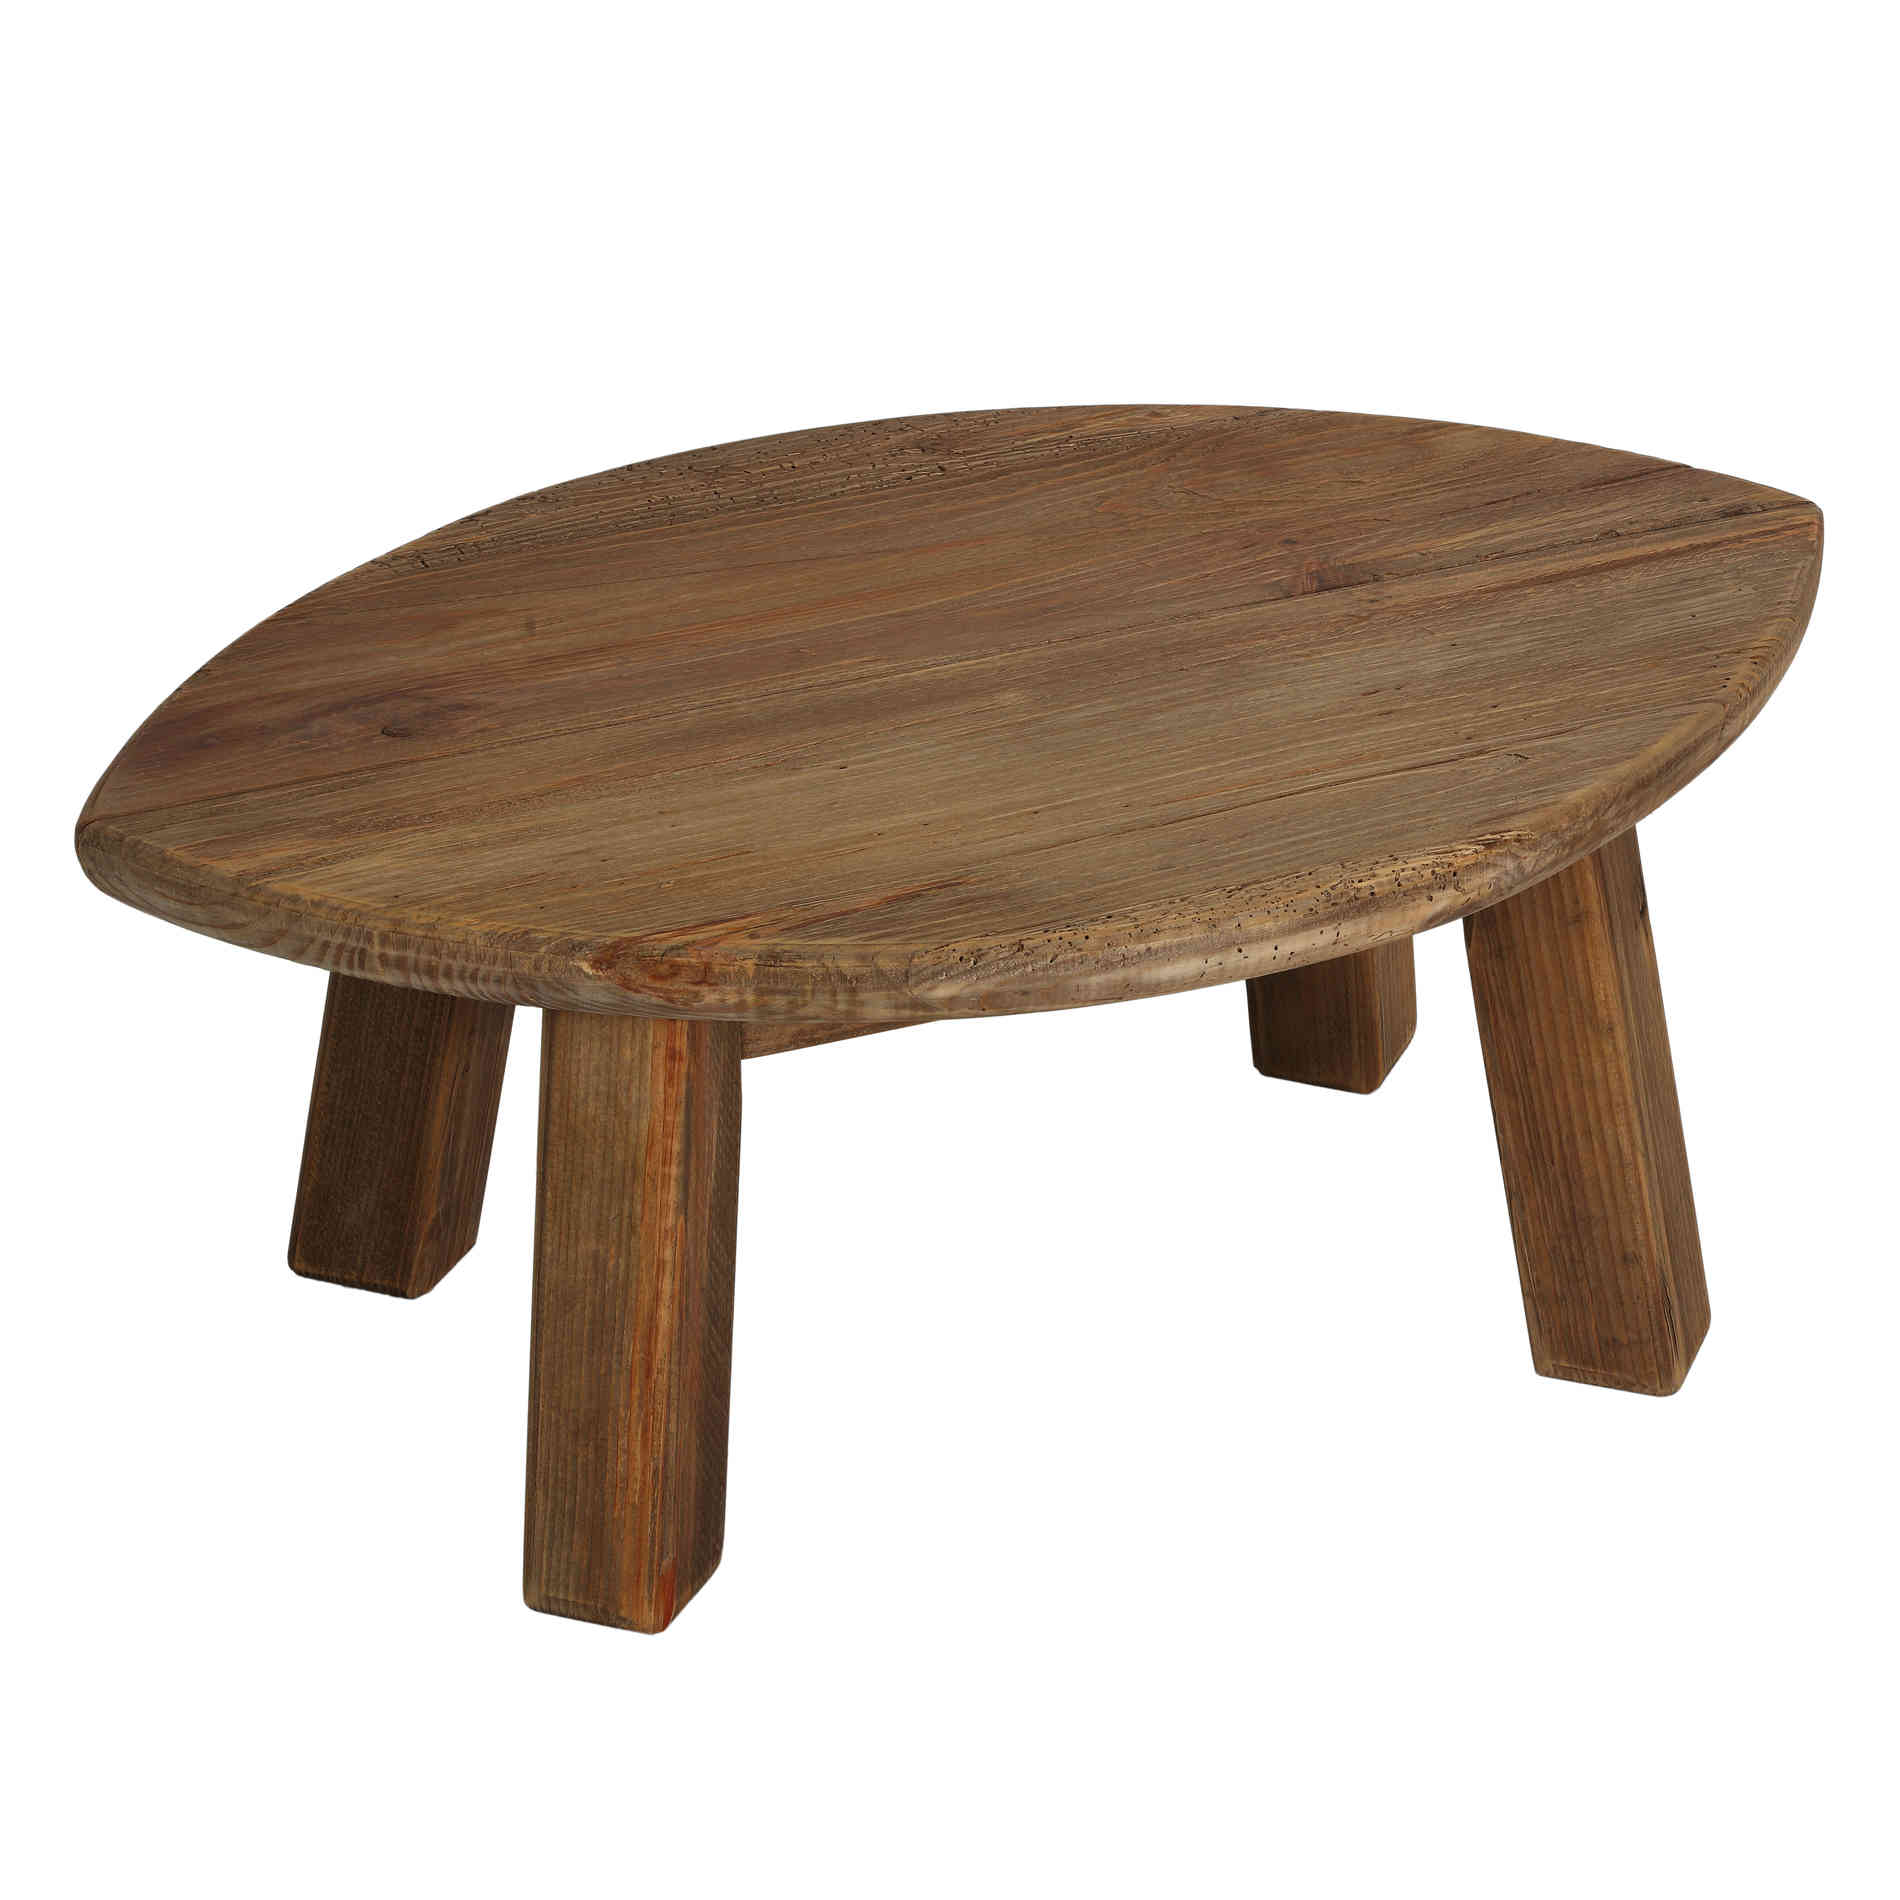 Bare Decor Wilder Oval End Table